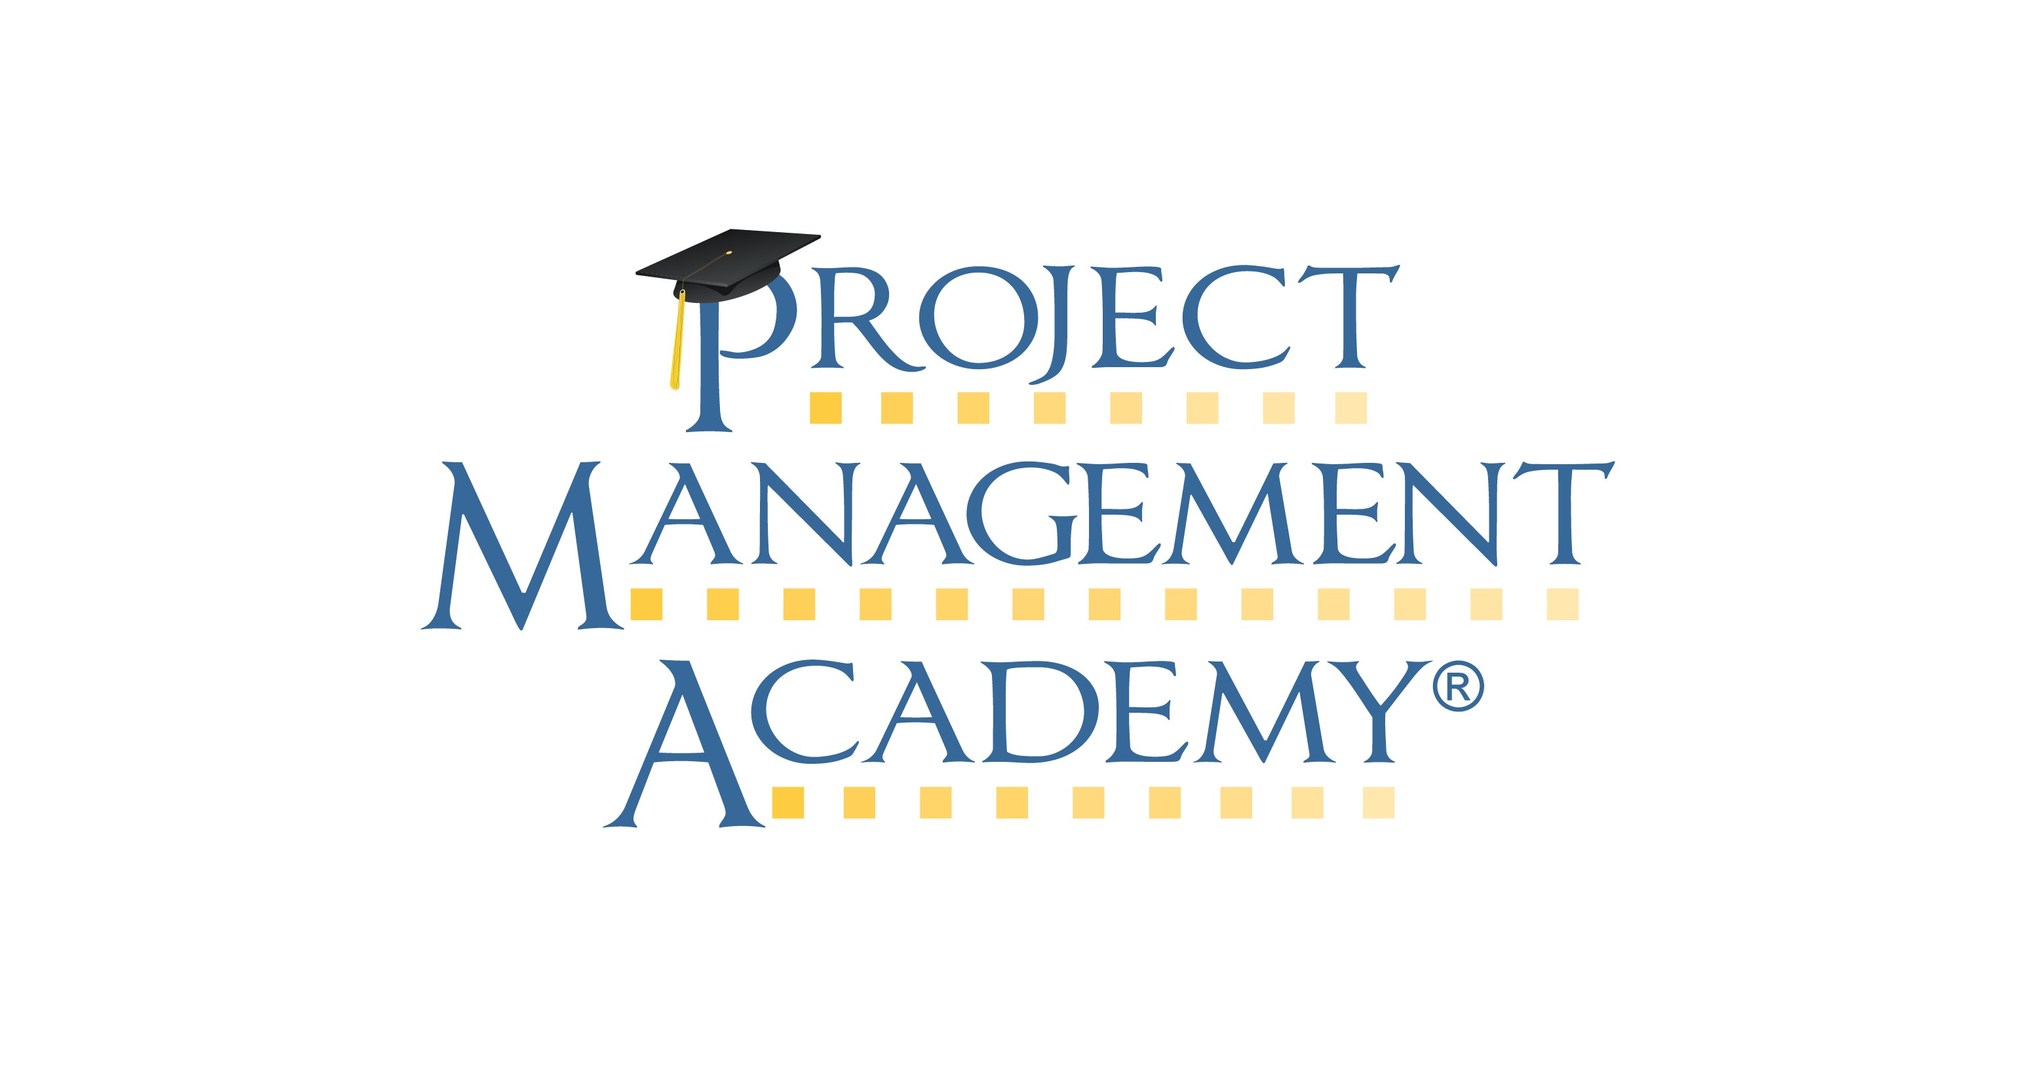 Project Management Academy Acquires Watermark Learning to Expand Its